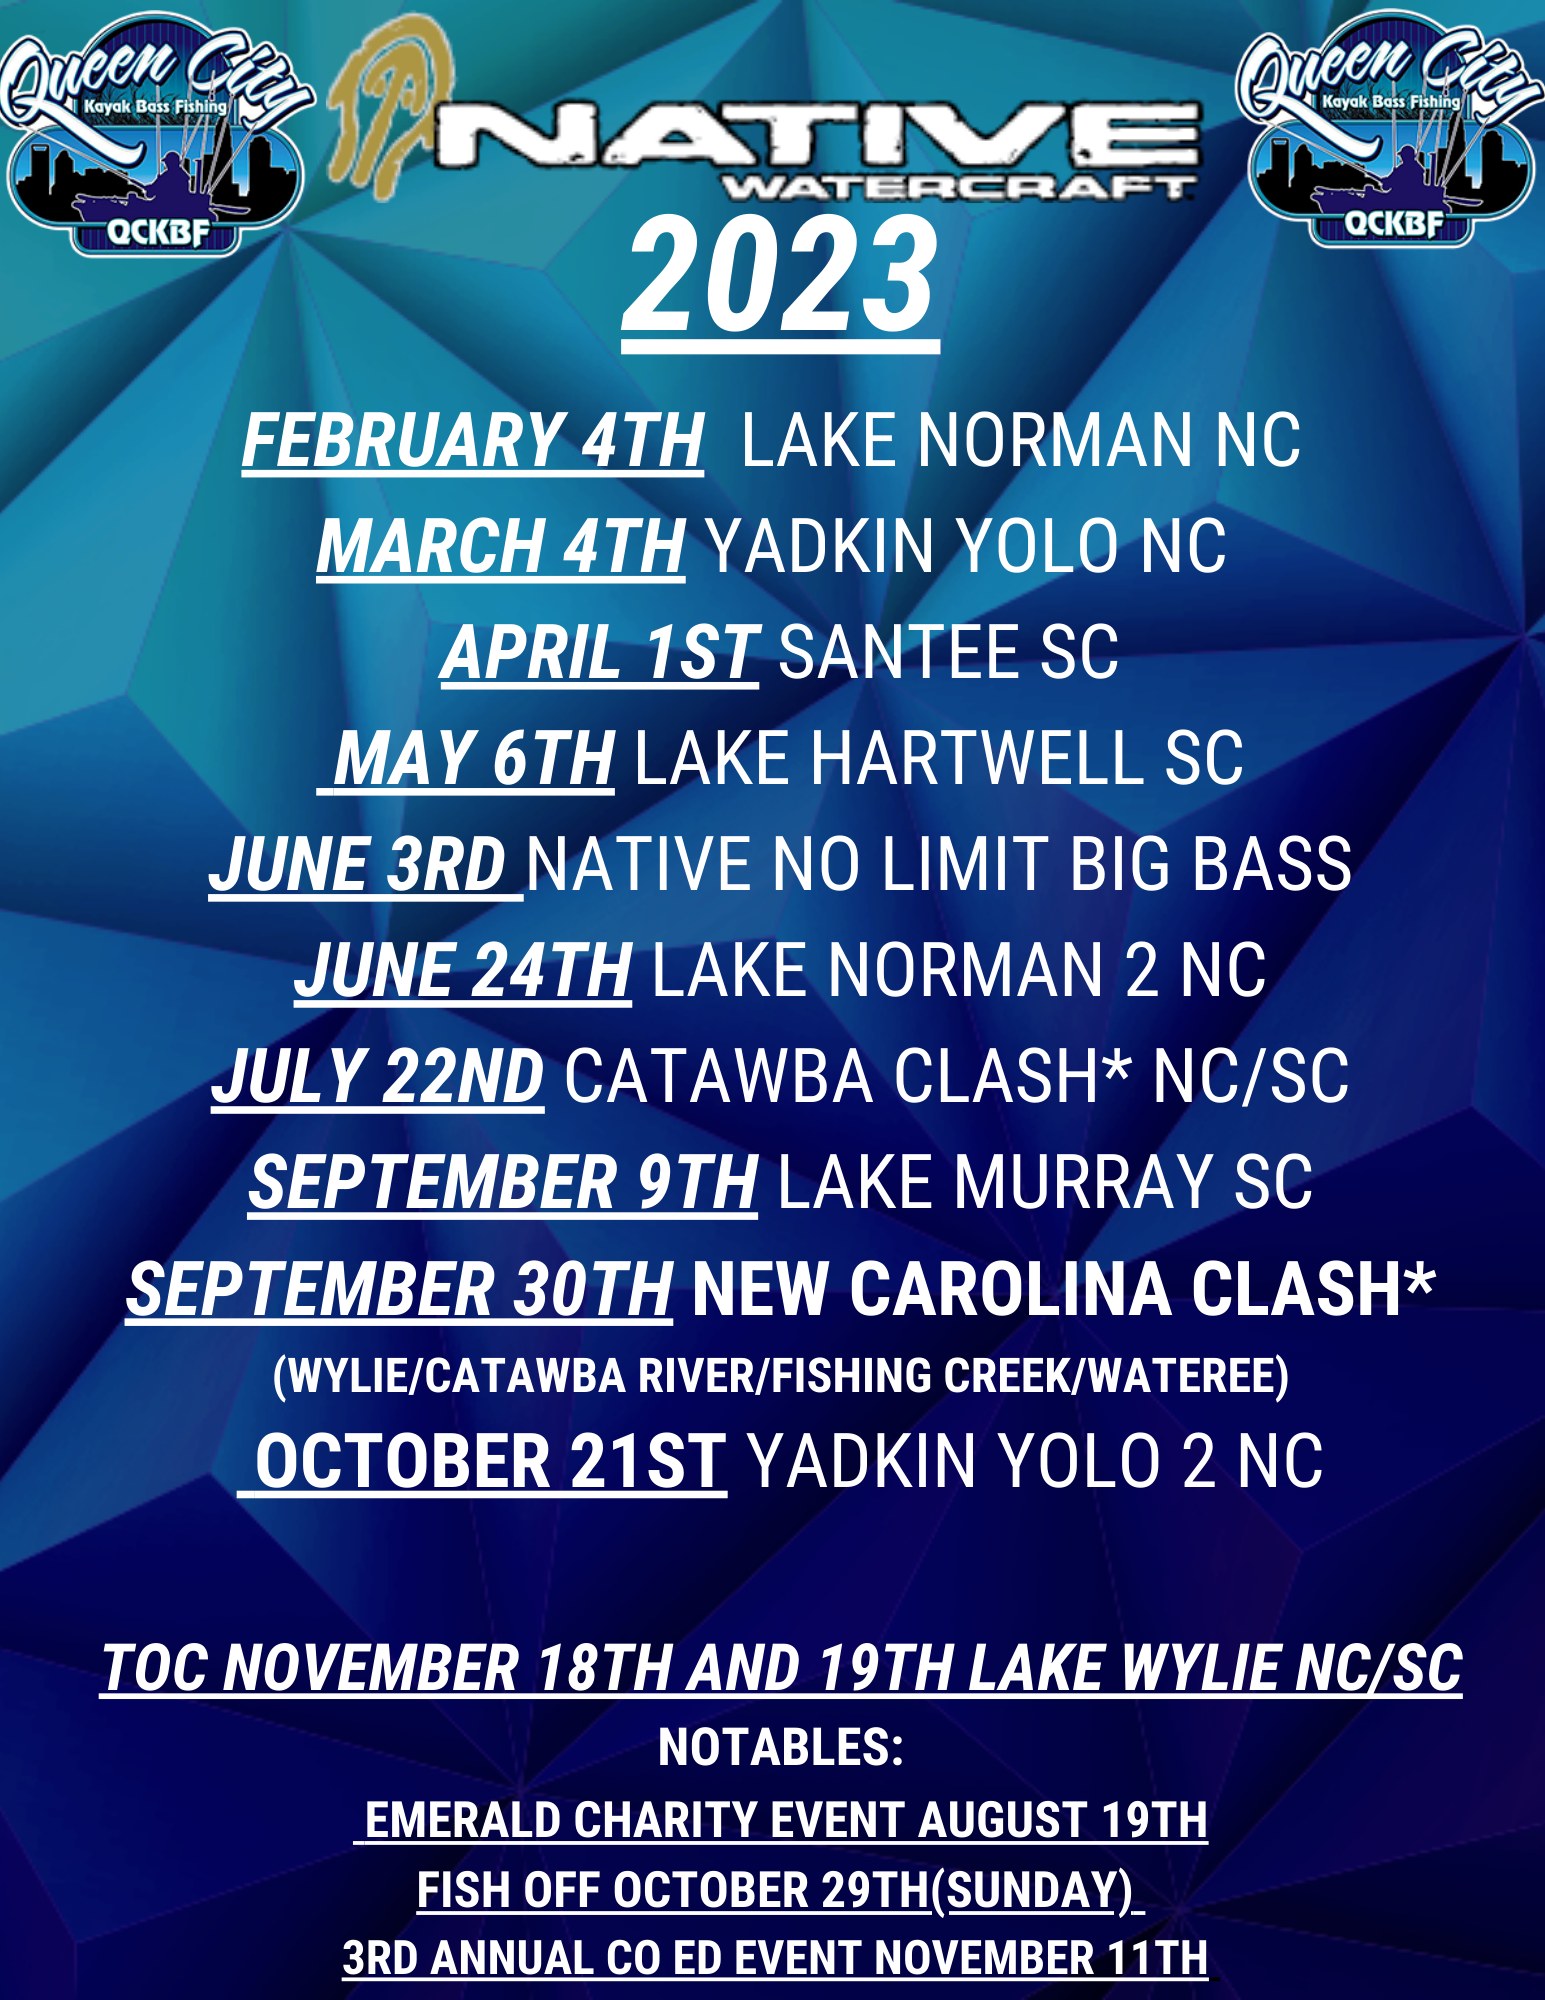 The 2023 schedule for QCKBF